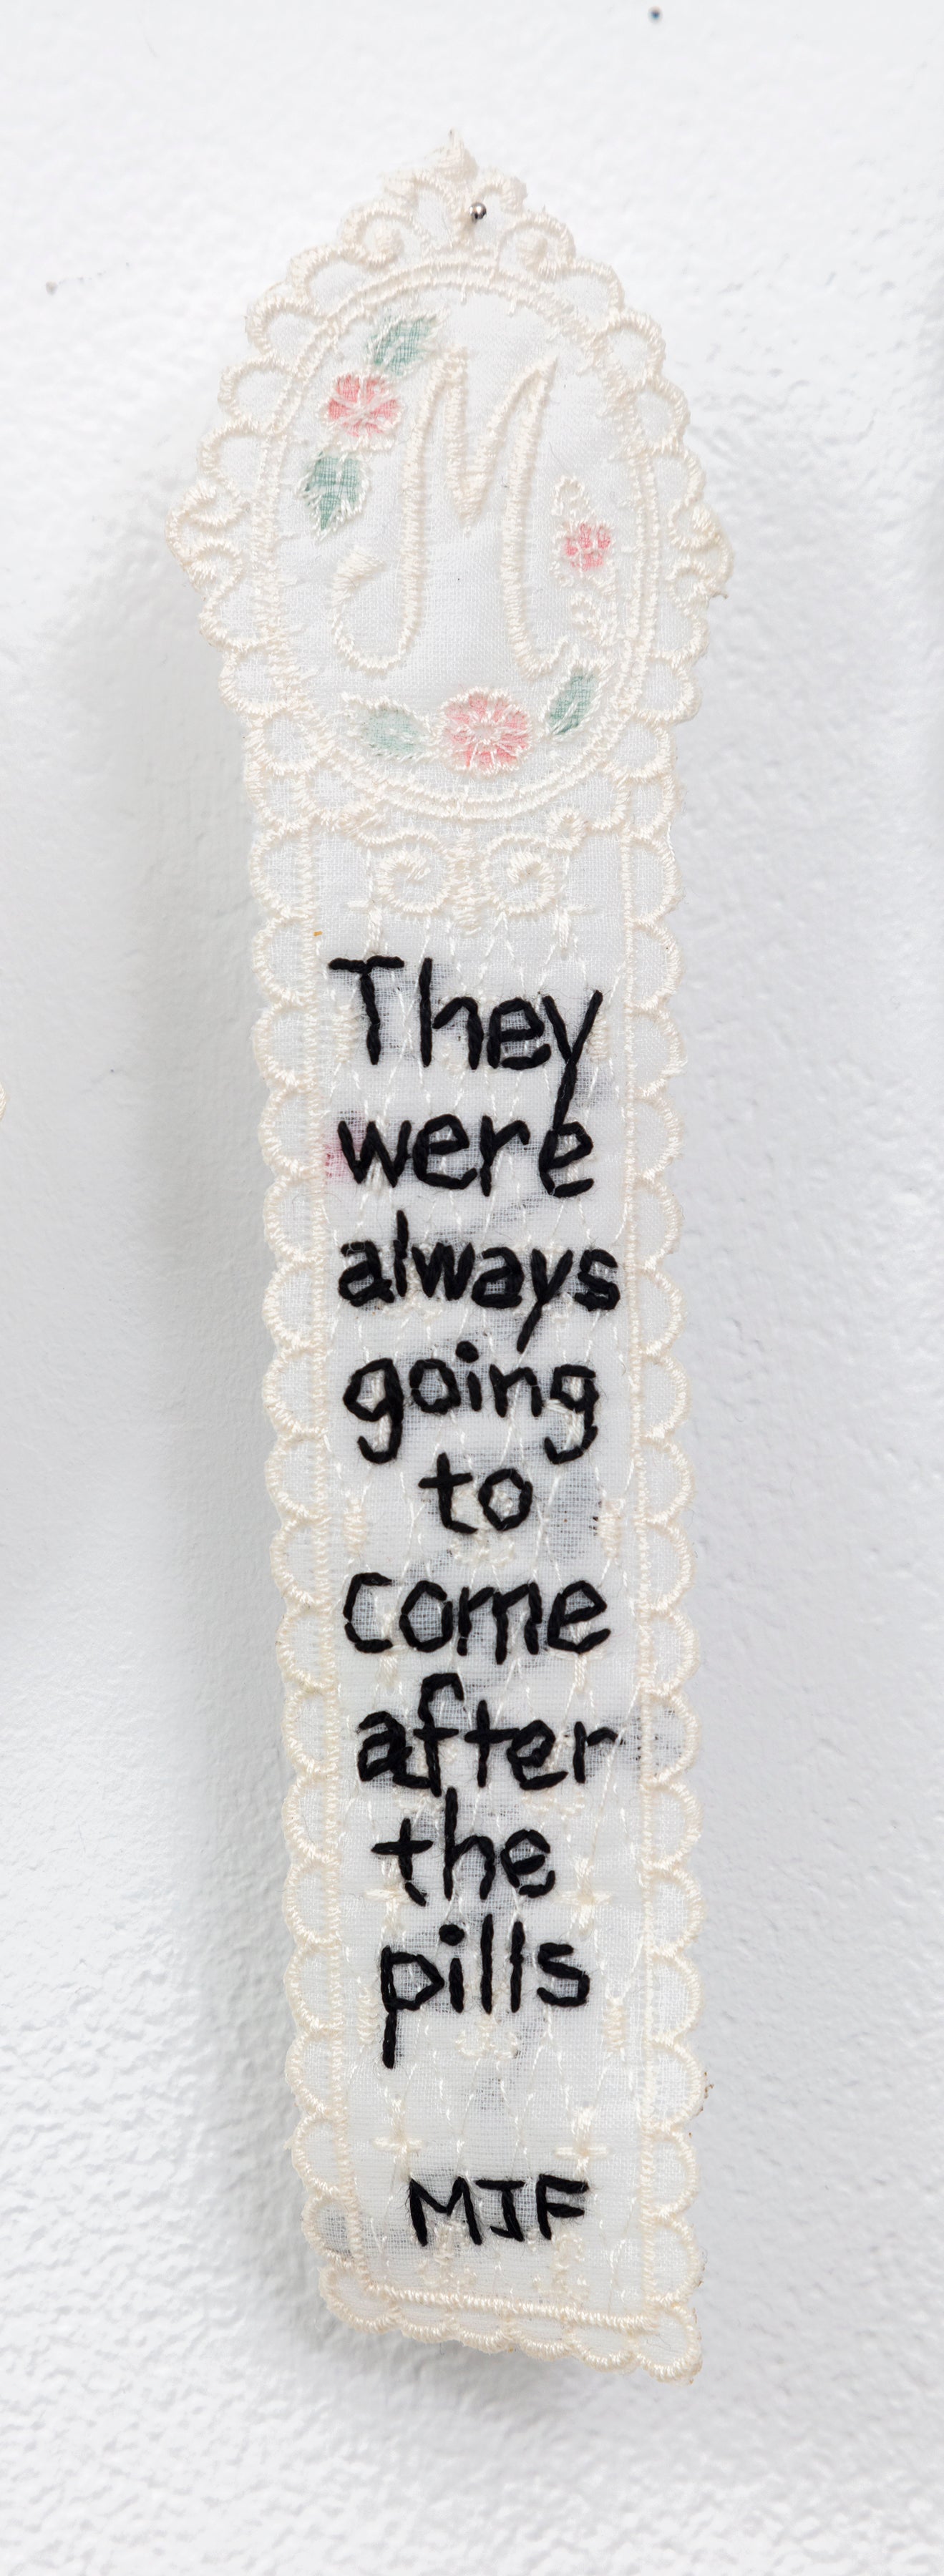 Diana Weymar | They were always going to come after the pills